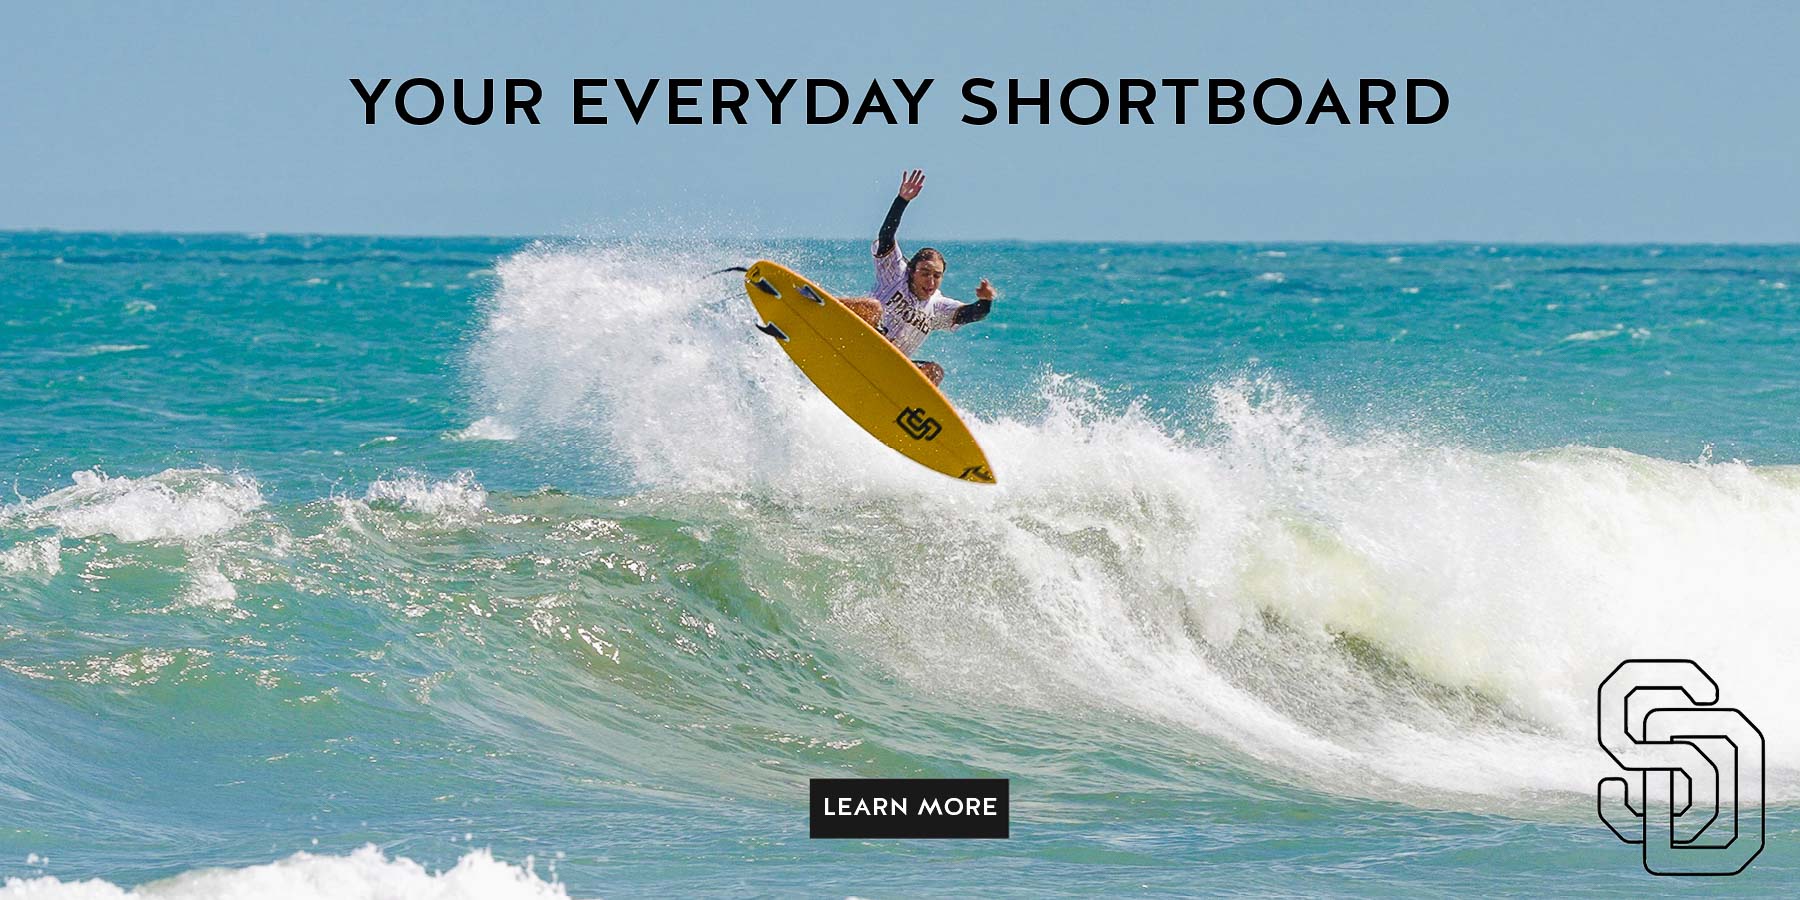 Picture of Jacob Zeke Szekely in the air on his SD Shortboard - Rusty Surfboards